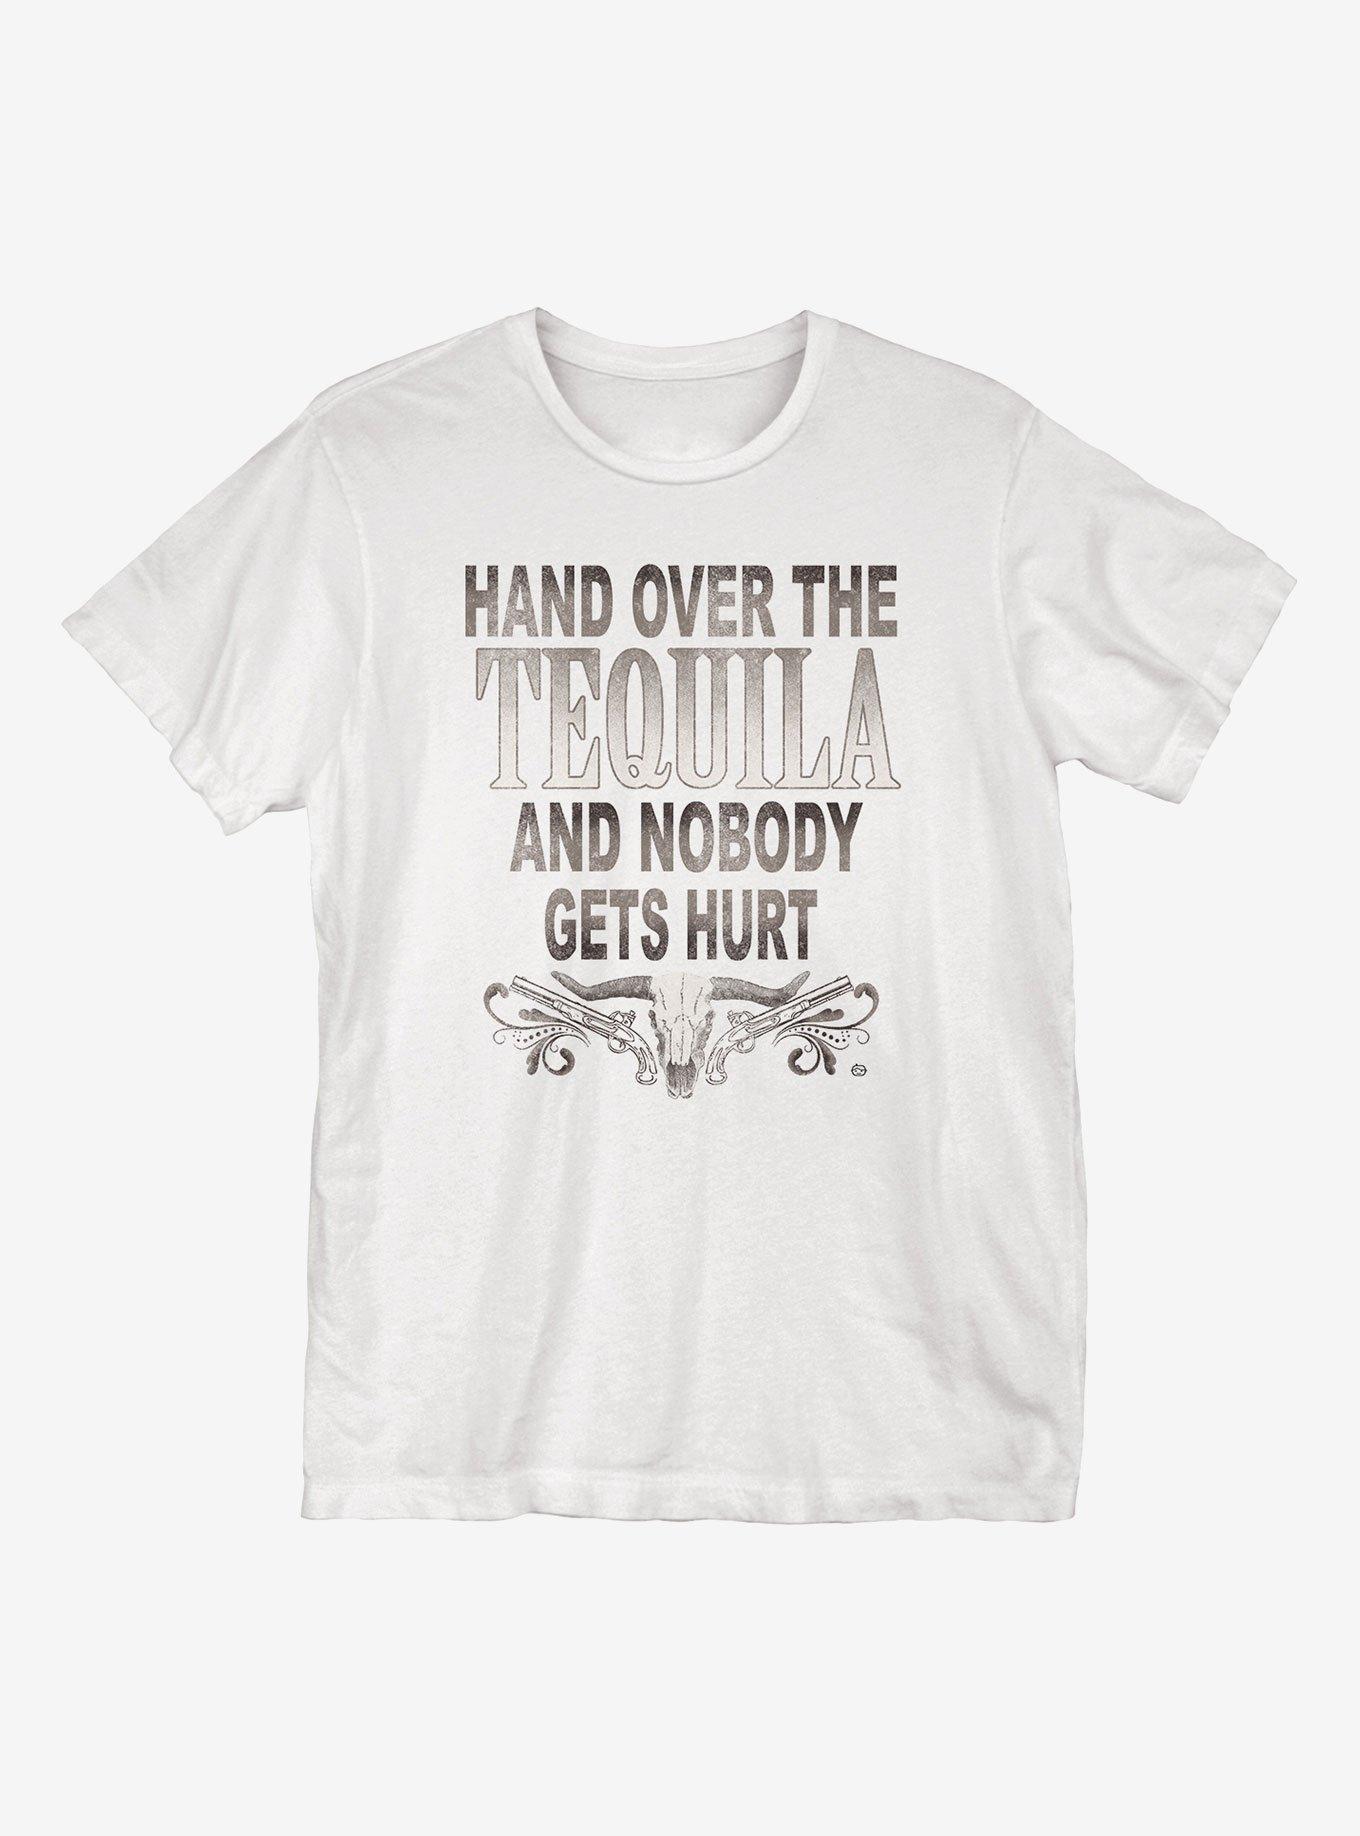 And Nobody Gets Hurt T-Shirt